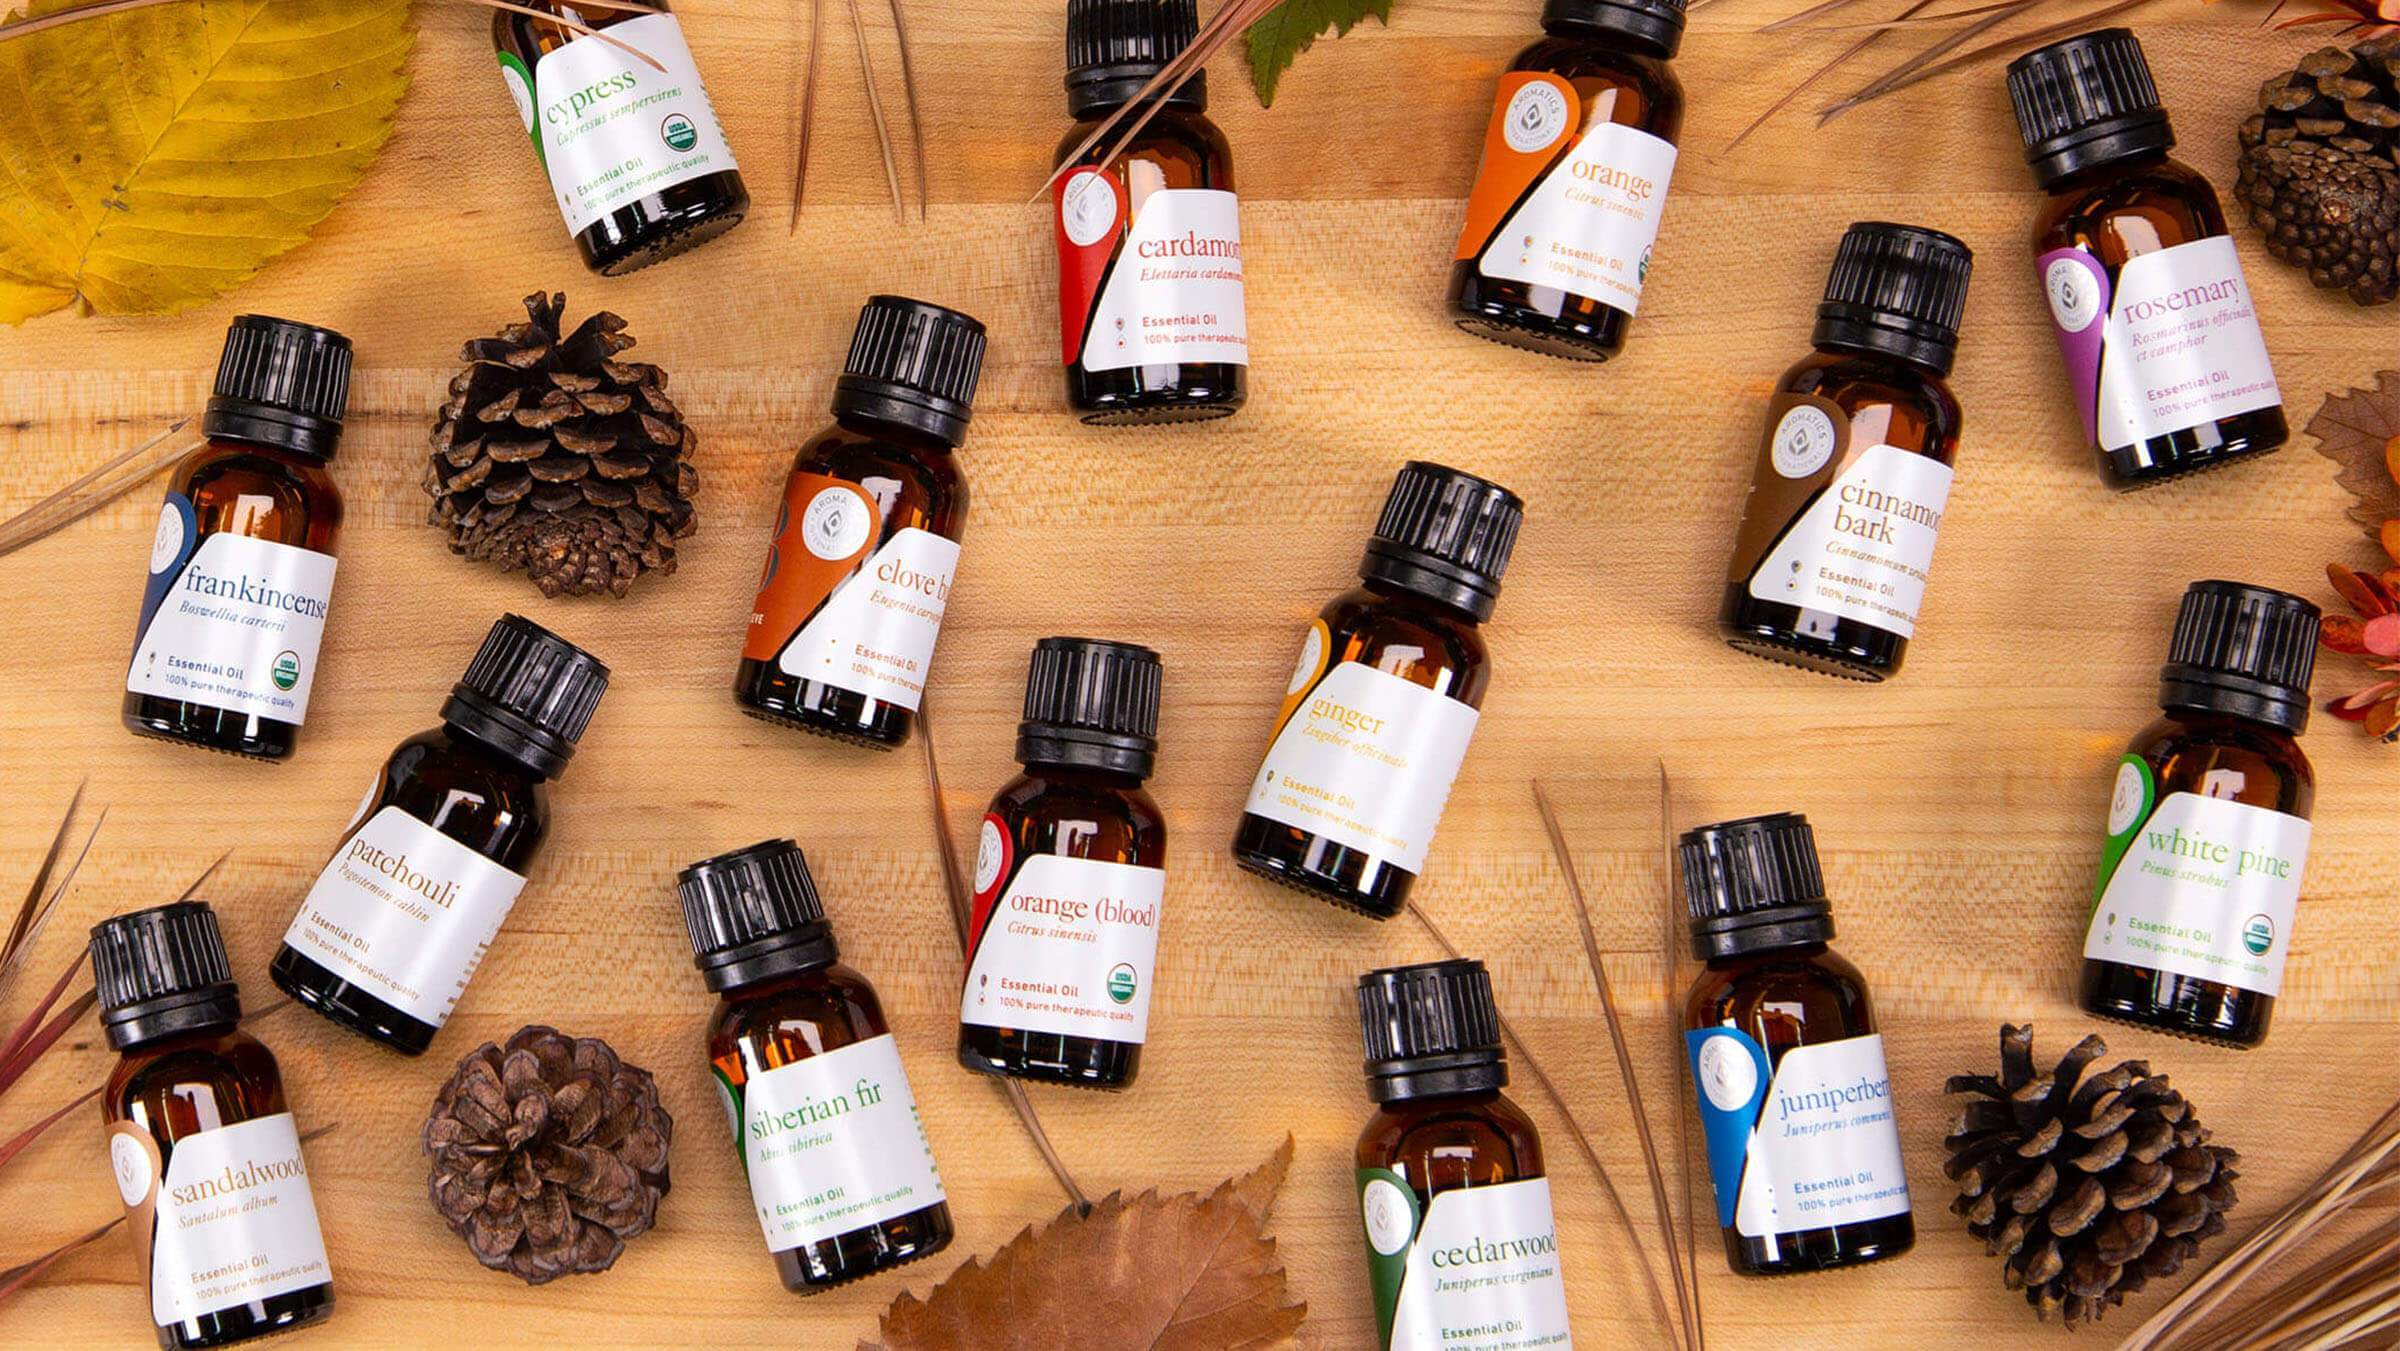 Winter Essential Oils for Home Diffusers and Soap, candle